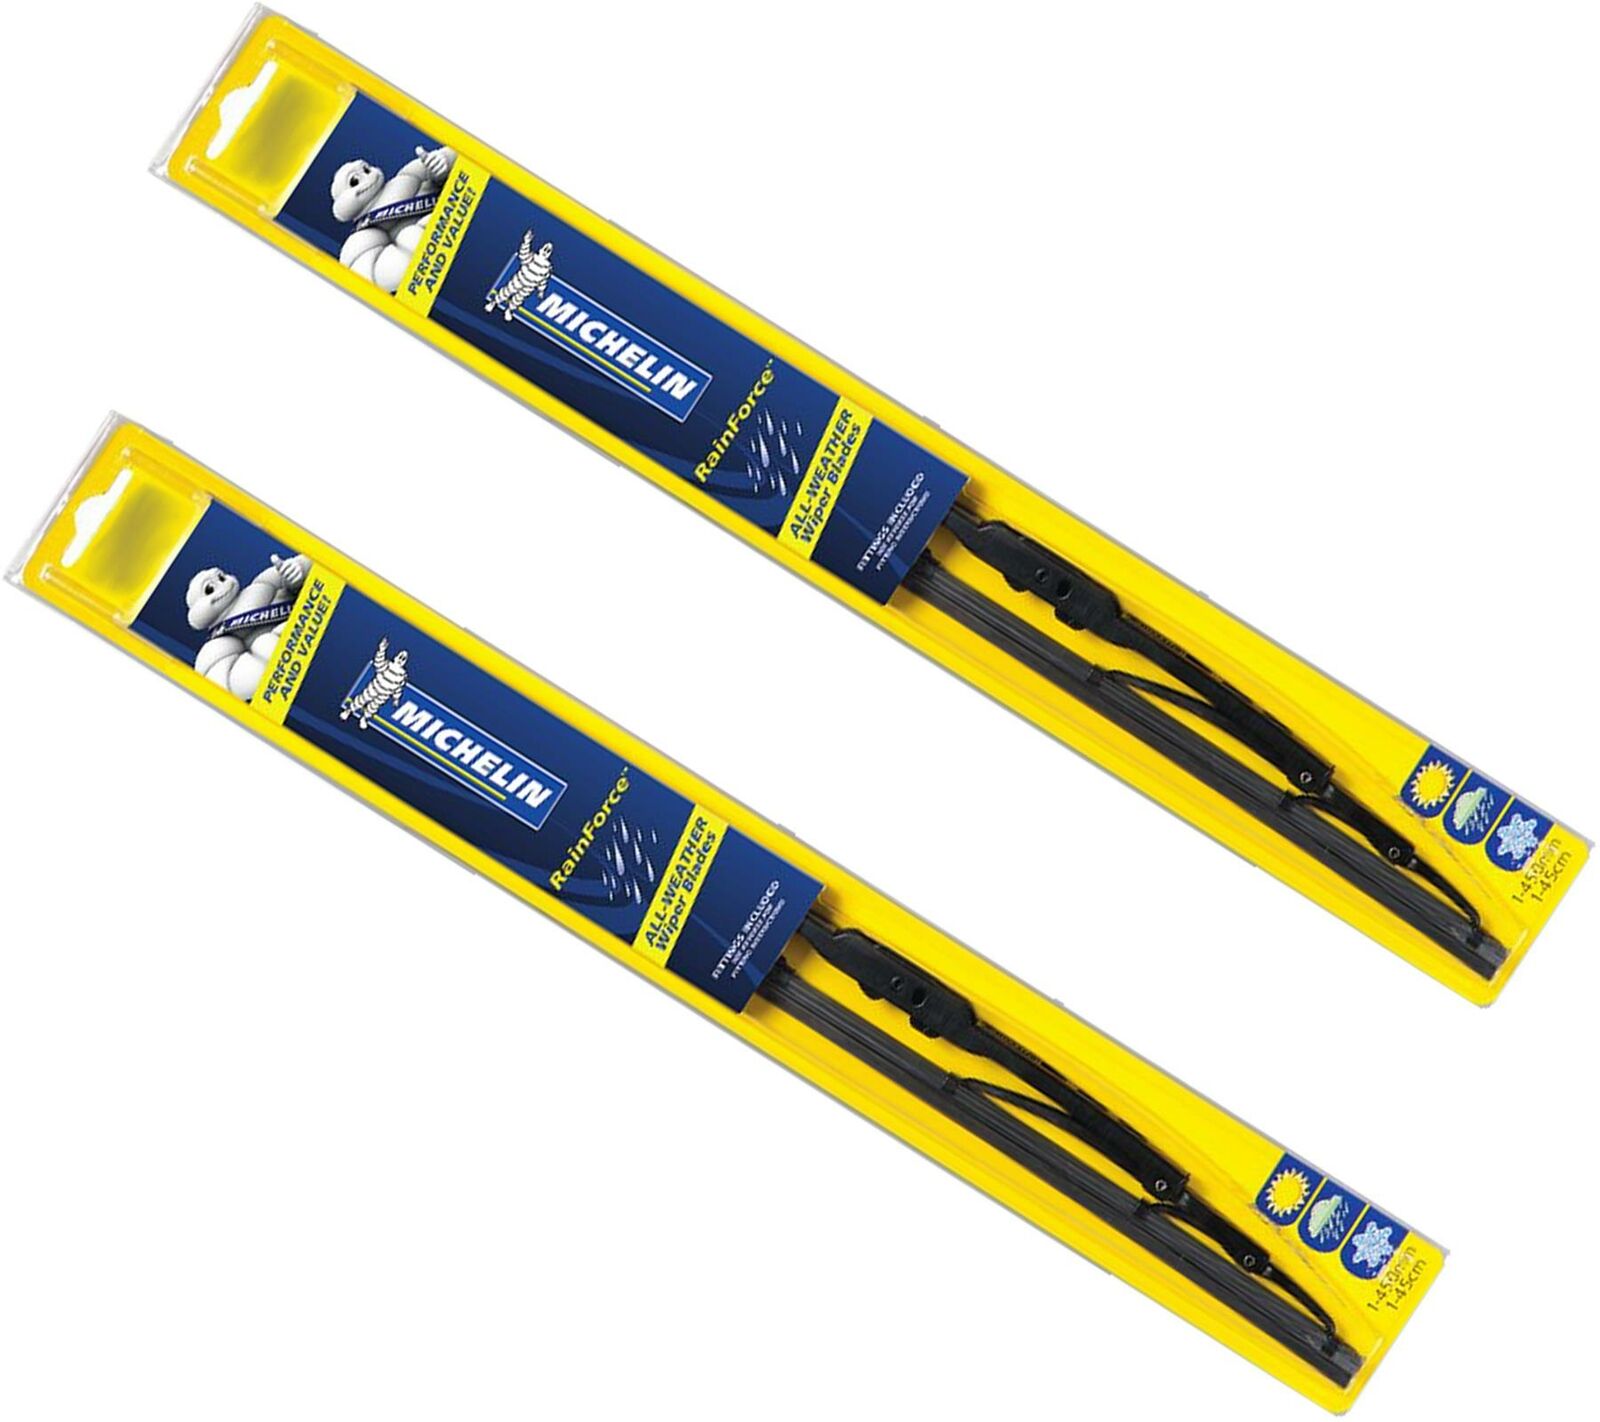 MICHELIN RAINFORCE Traditional Front Wiper Blades Set 500mm/20" + 530mm/21''